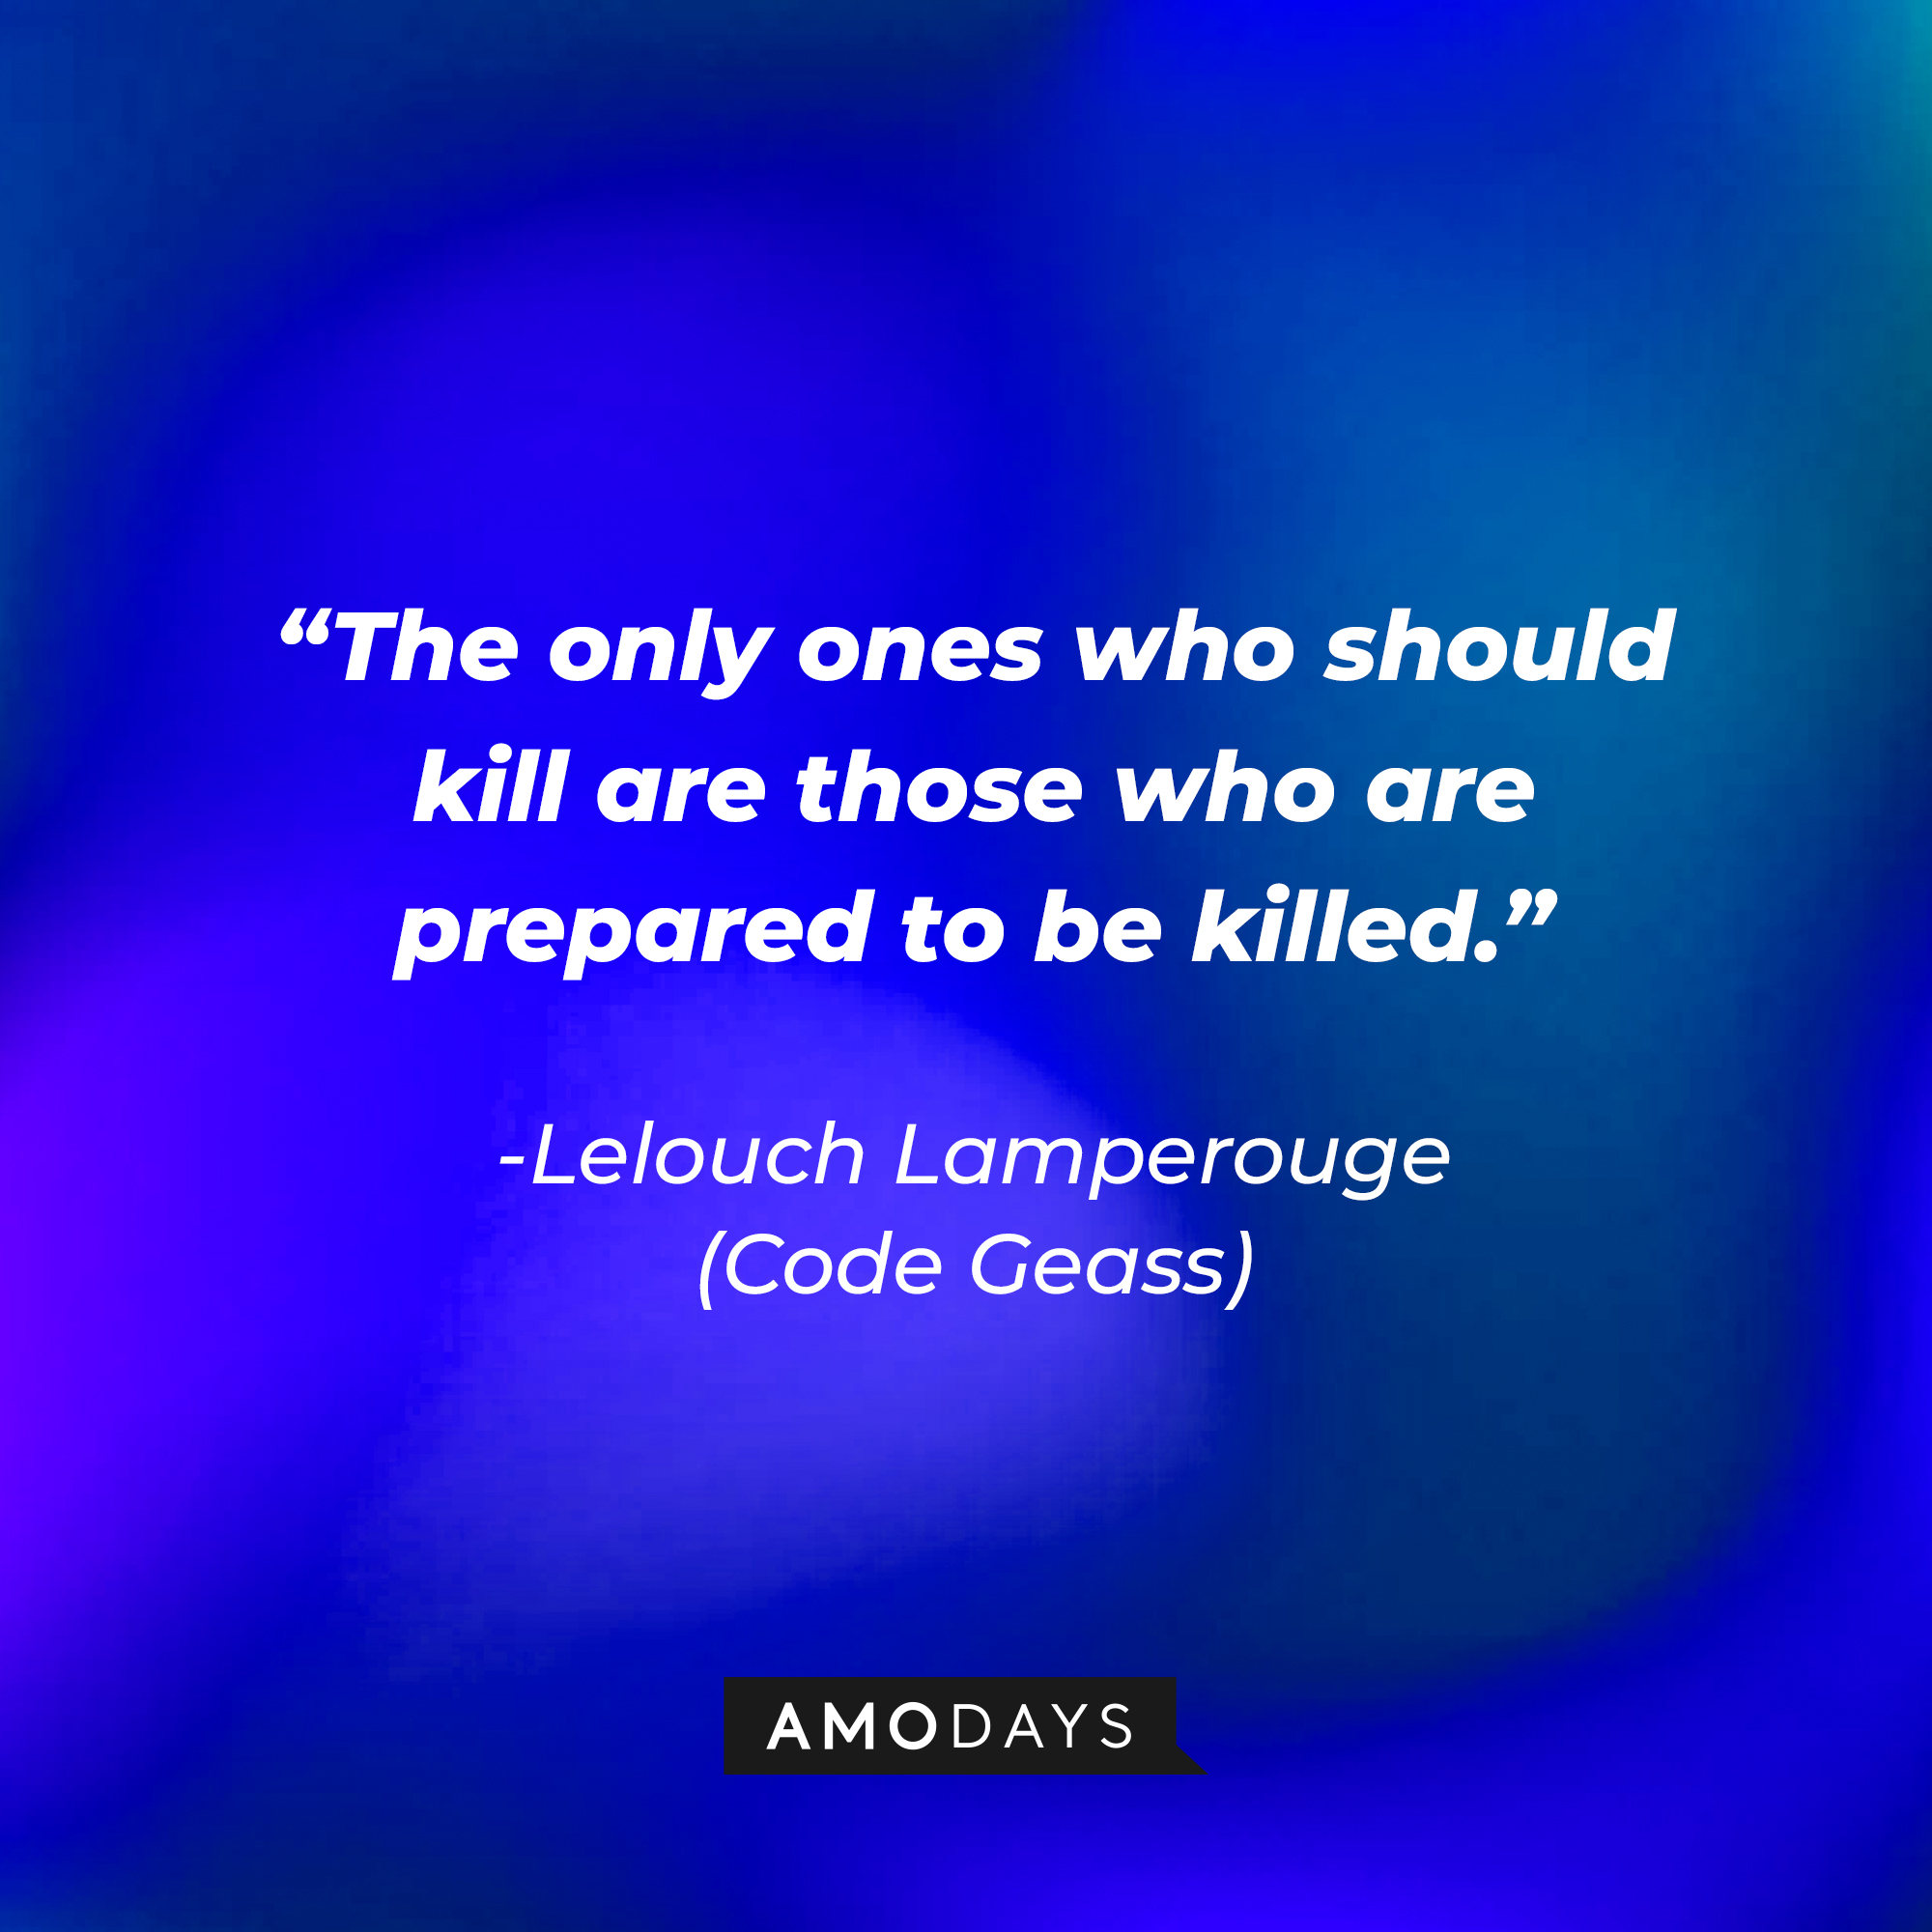 Lelouch Lamperouge's quote: "The only ones who should kill are those who are prepared to be killed." | Source: Amodays